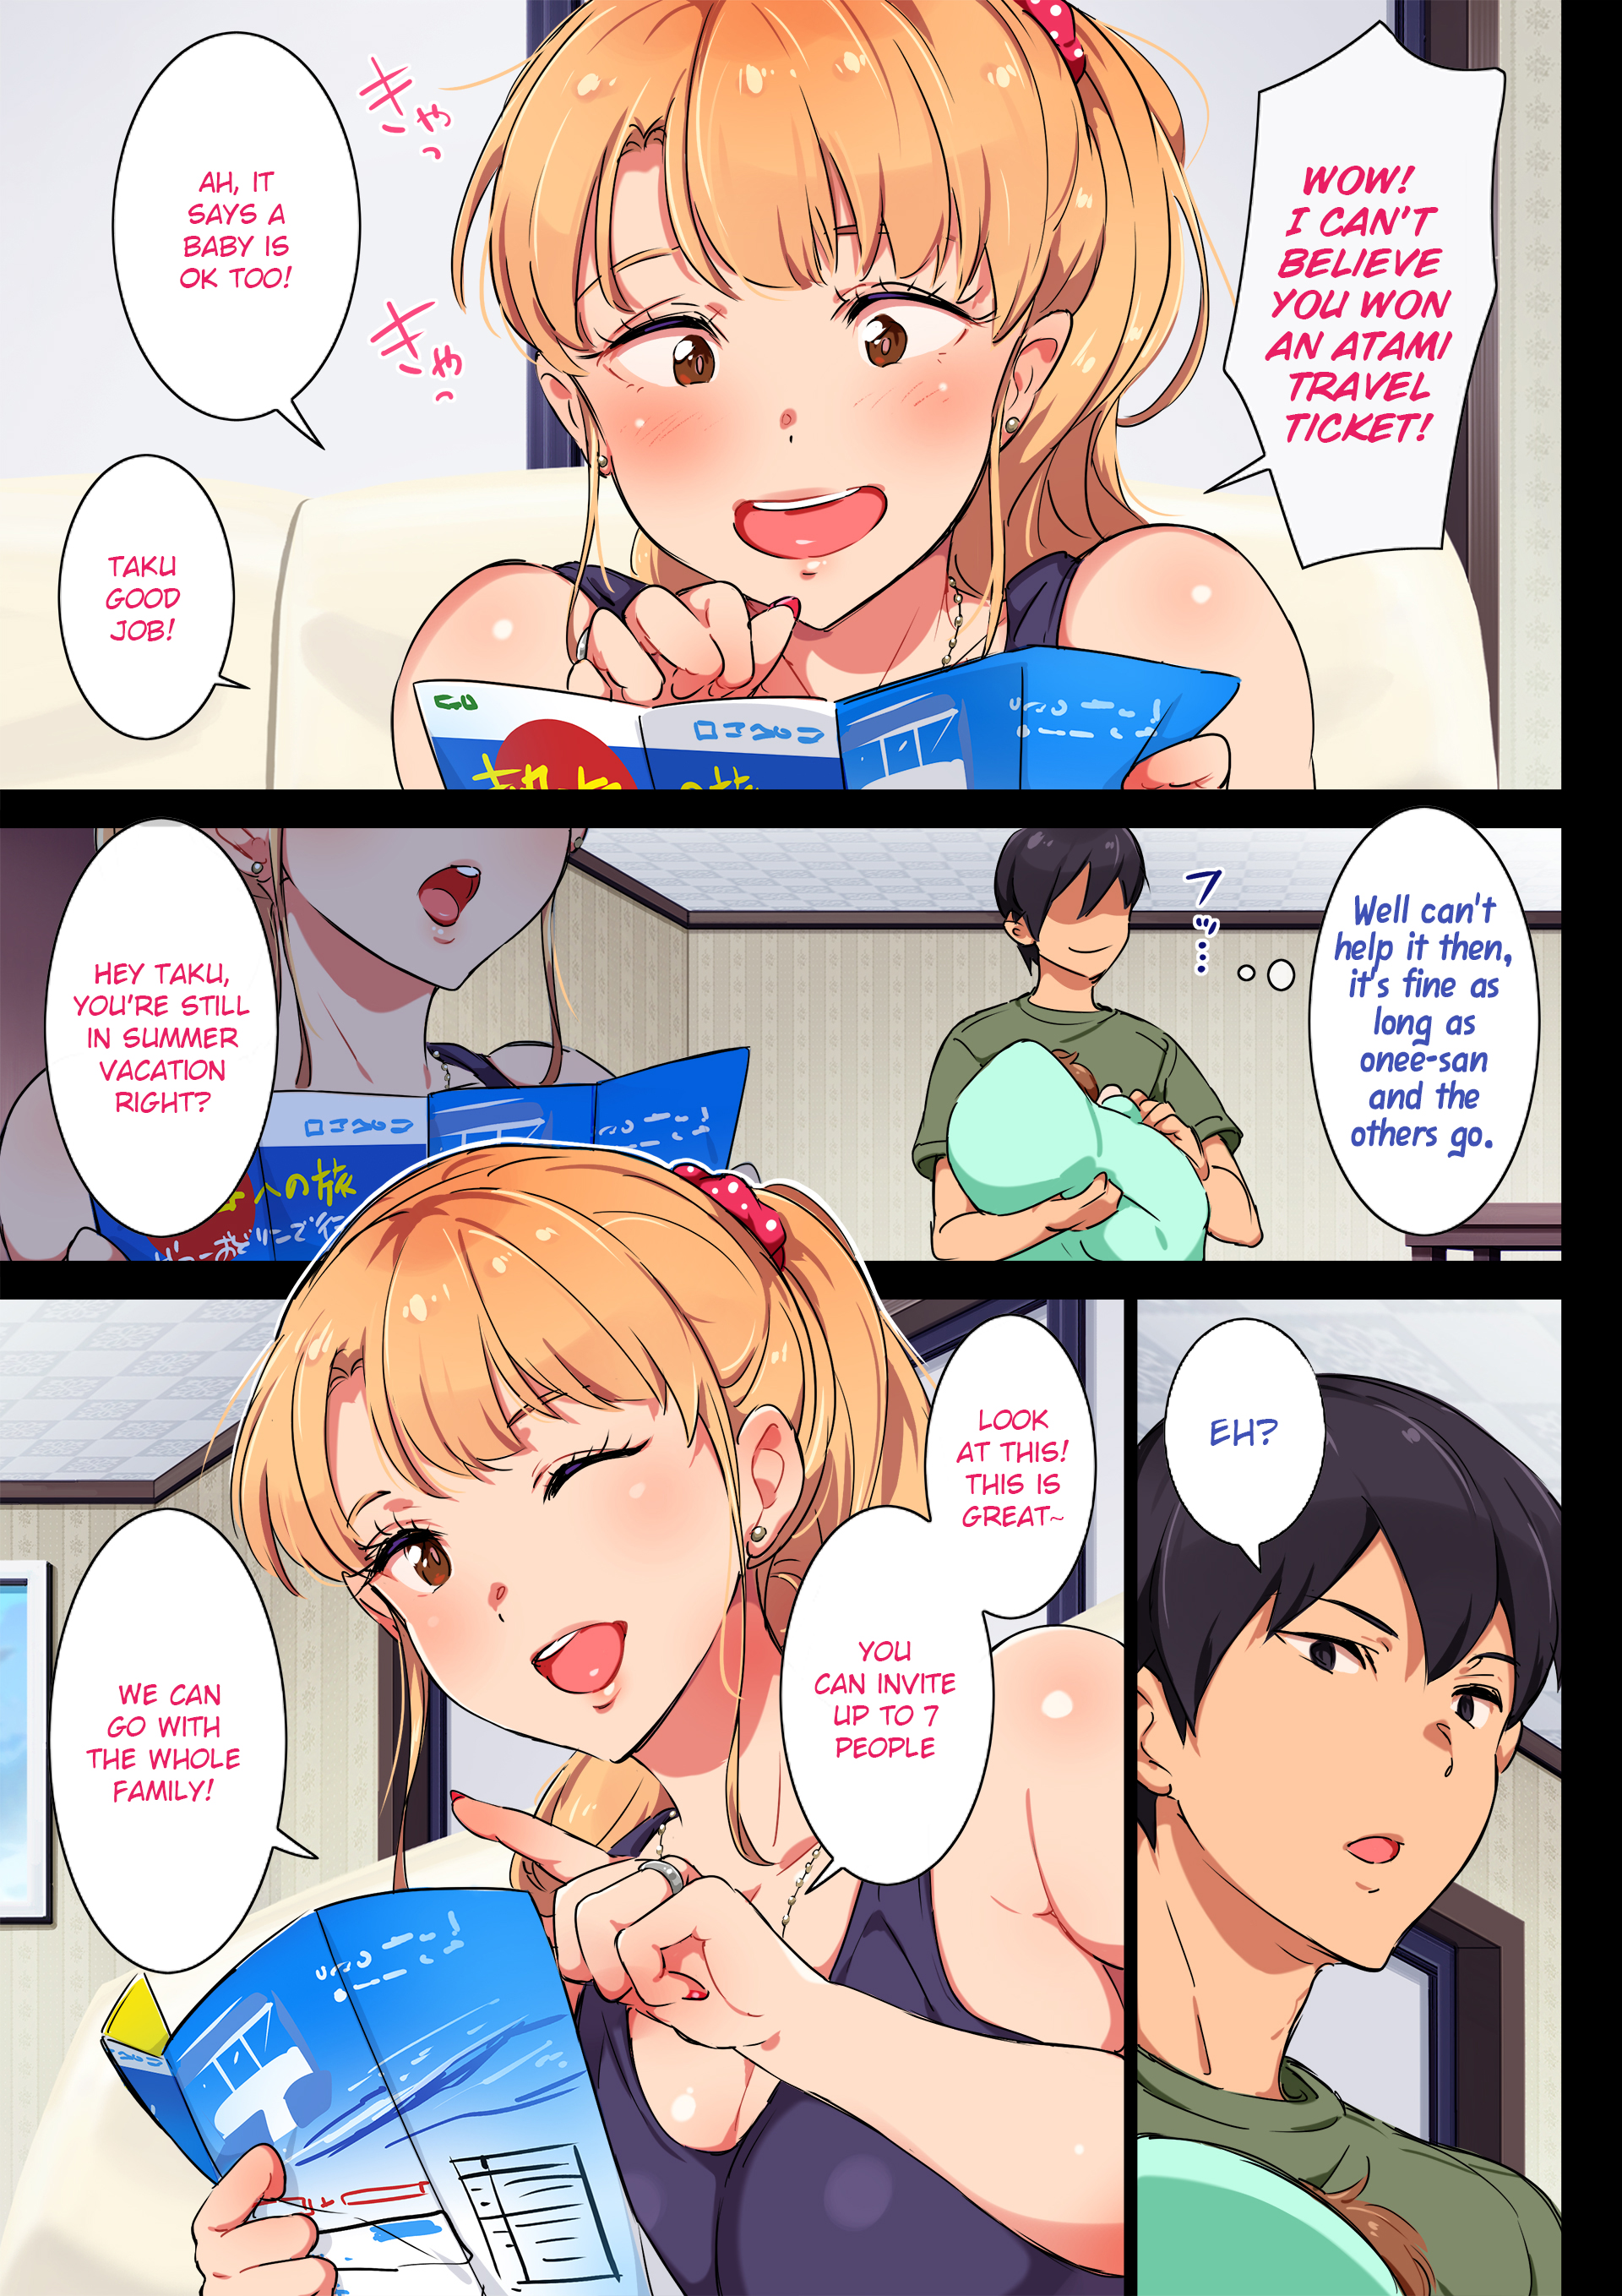 Hentai Manga Sister Brother Sex - Pervy busty sister fucks her younger brother in the ocean - taboo comics -  47 Pics | Hentai City